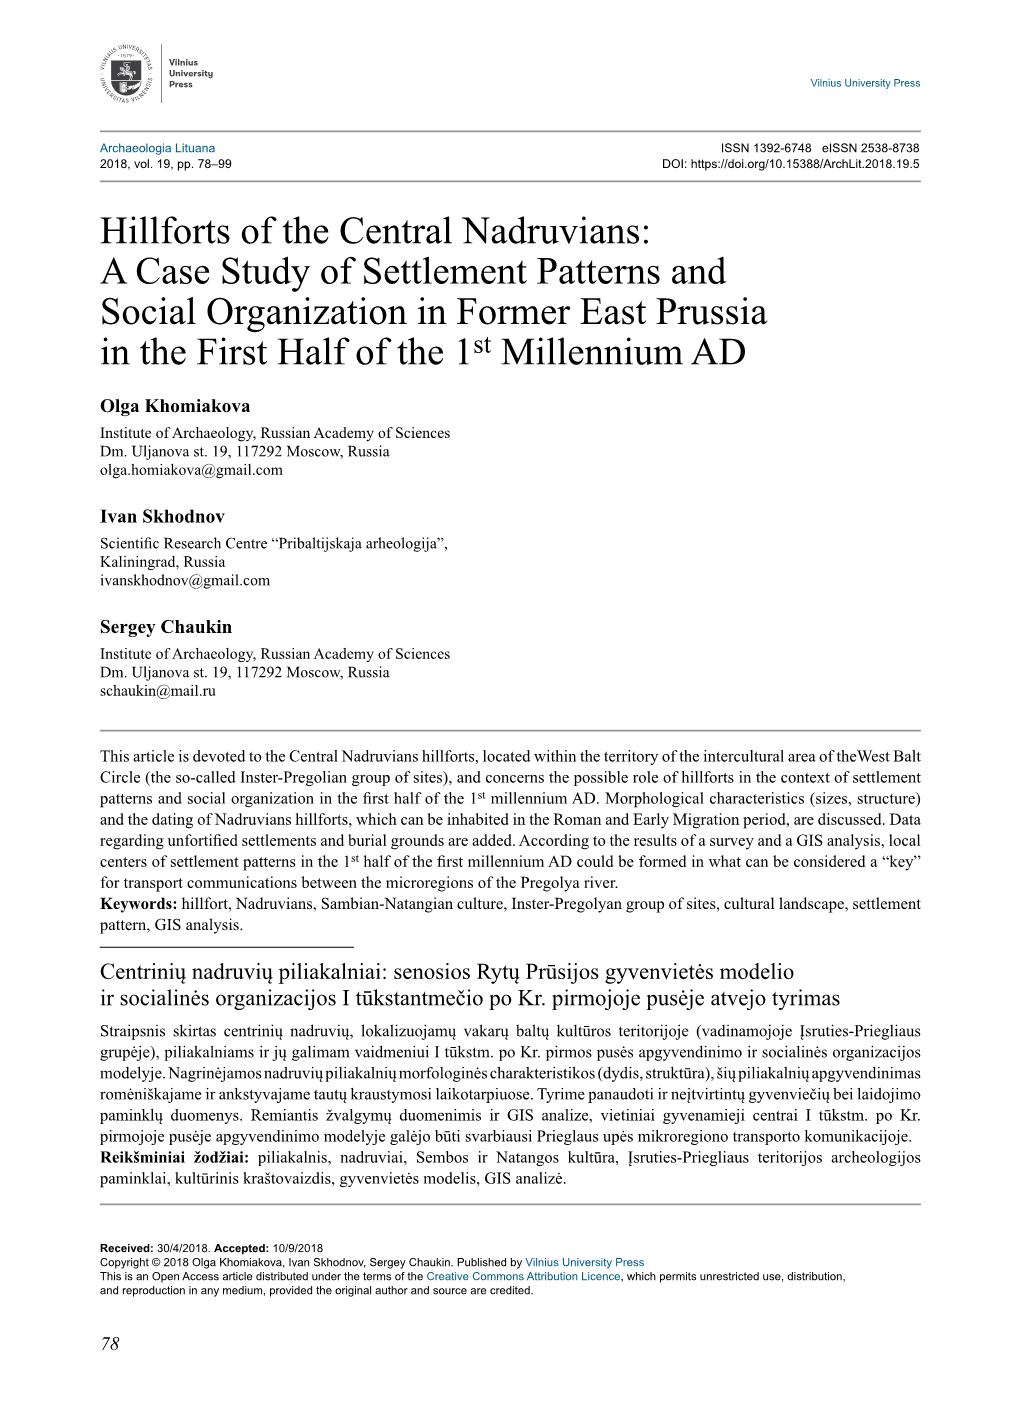 Hillforts of the Central Nadruvians: a Case Study of Settlement Patterns and Social Organization in Former East Prussia in the First Half of the 1St Millennium AD